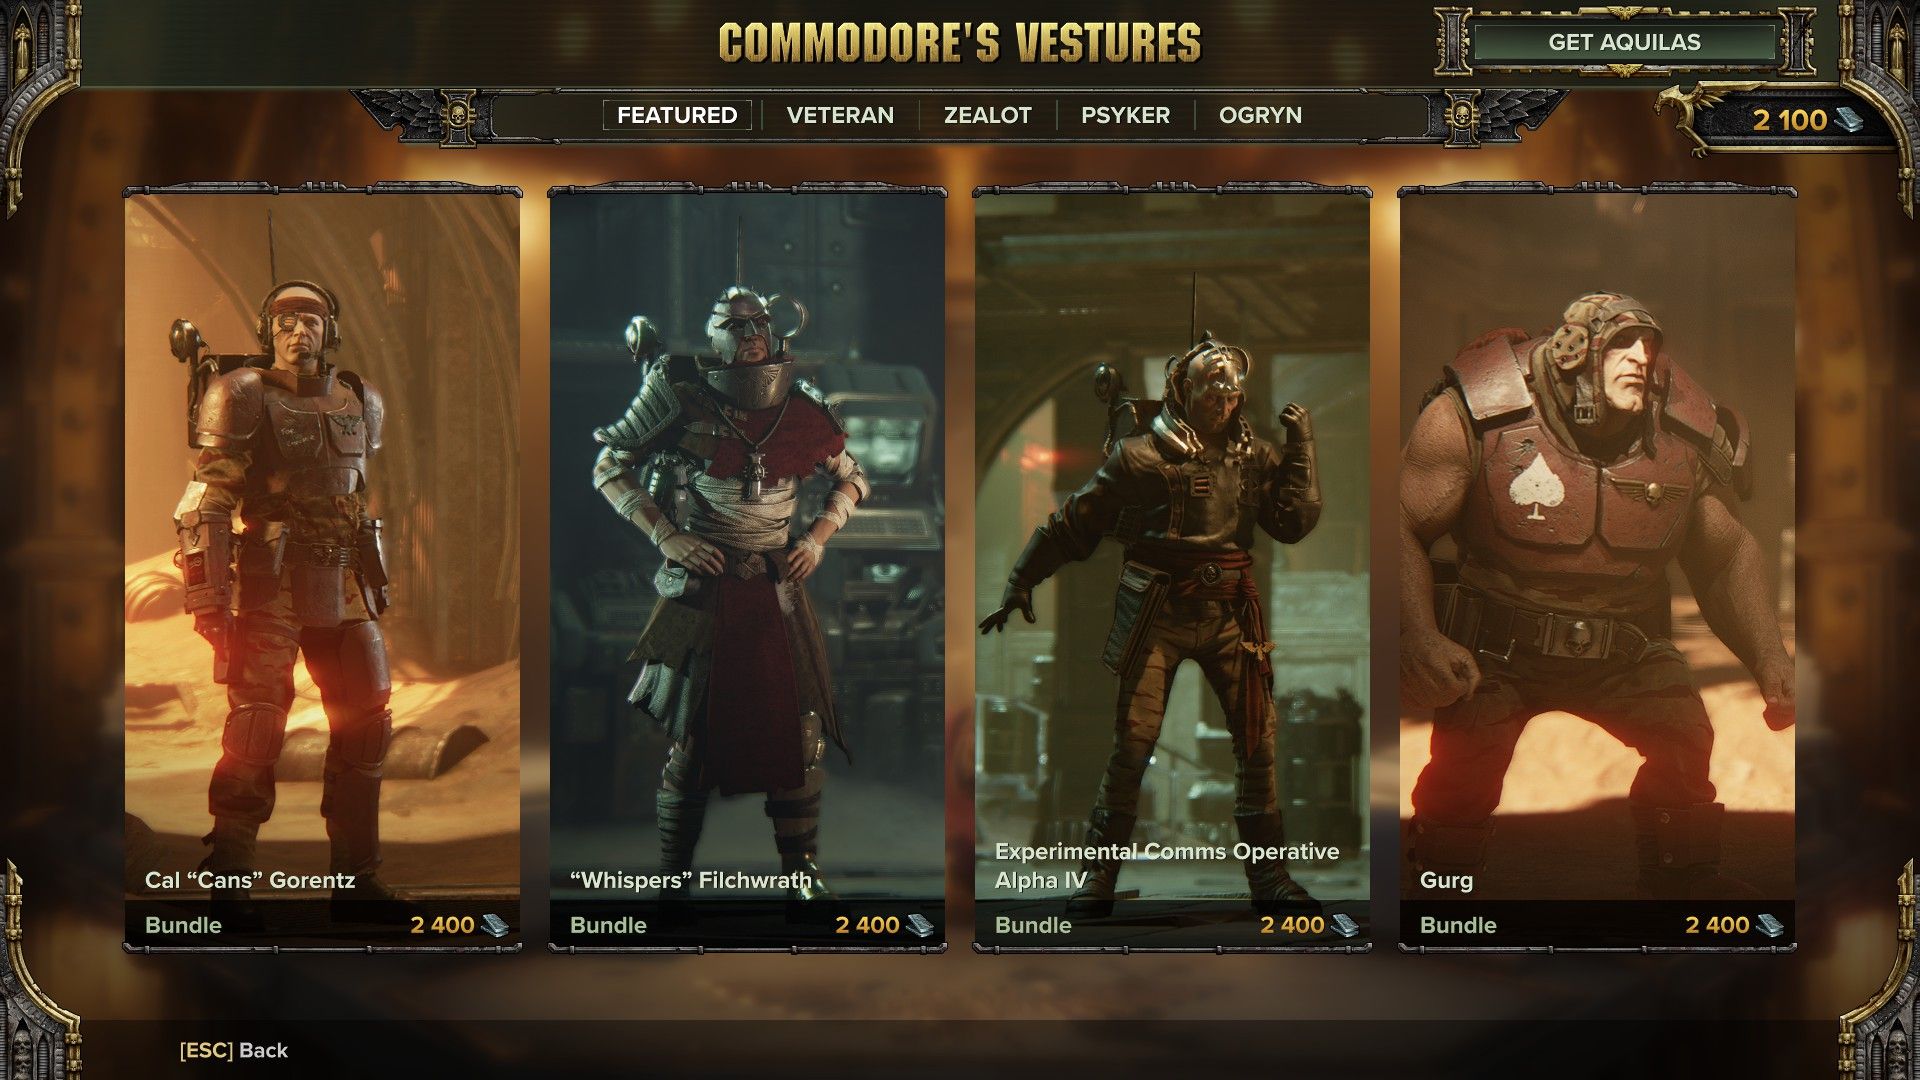 the main screen of The Commodore's Vestures in Warhammer 40,000: Darktide